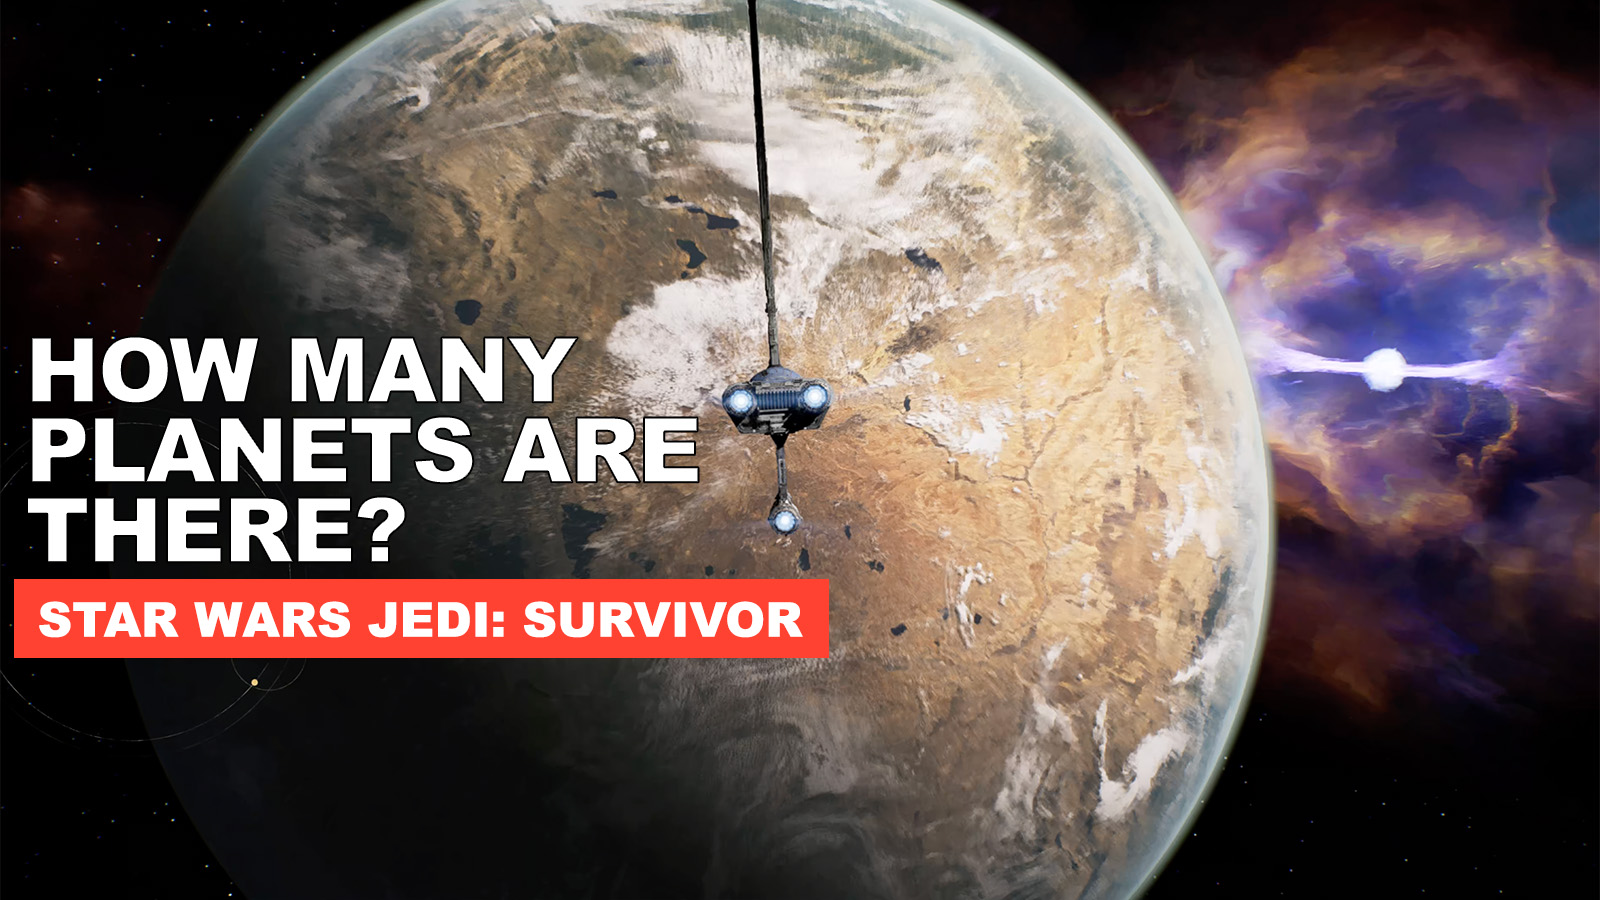 Star Wars Jedi Survivor How Many Planets Are There